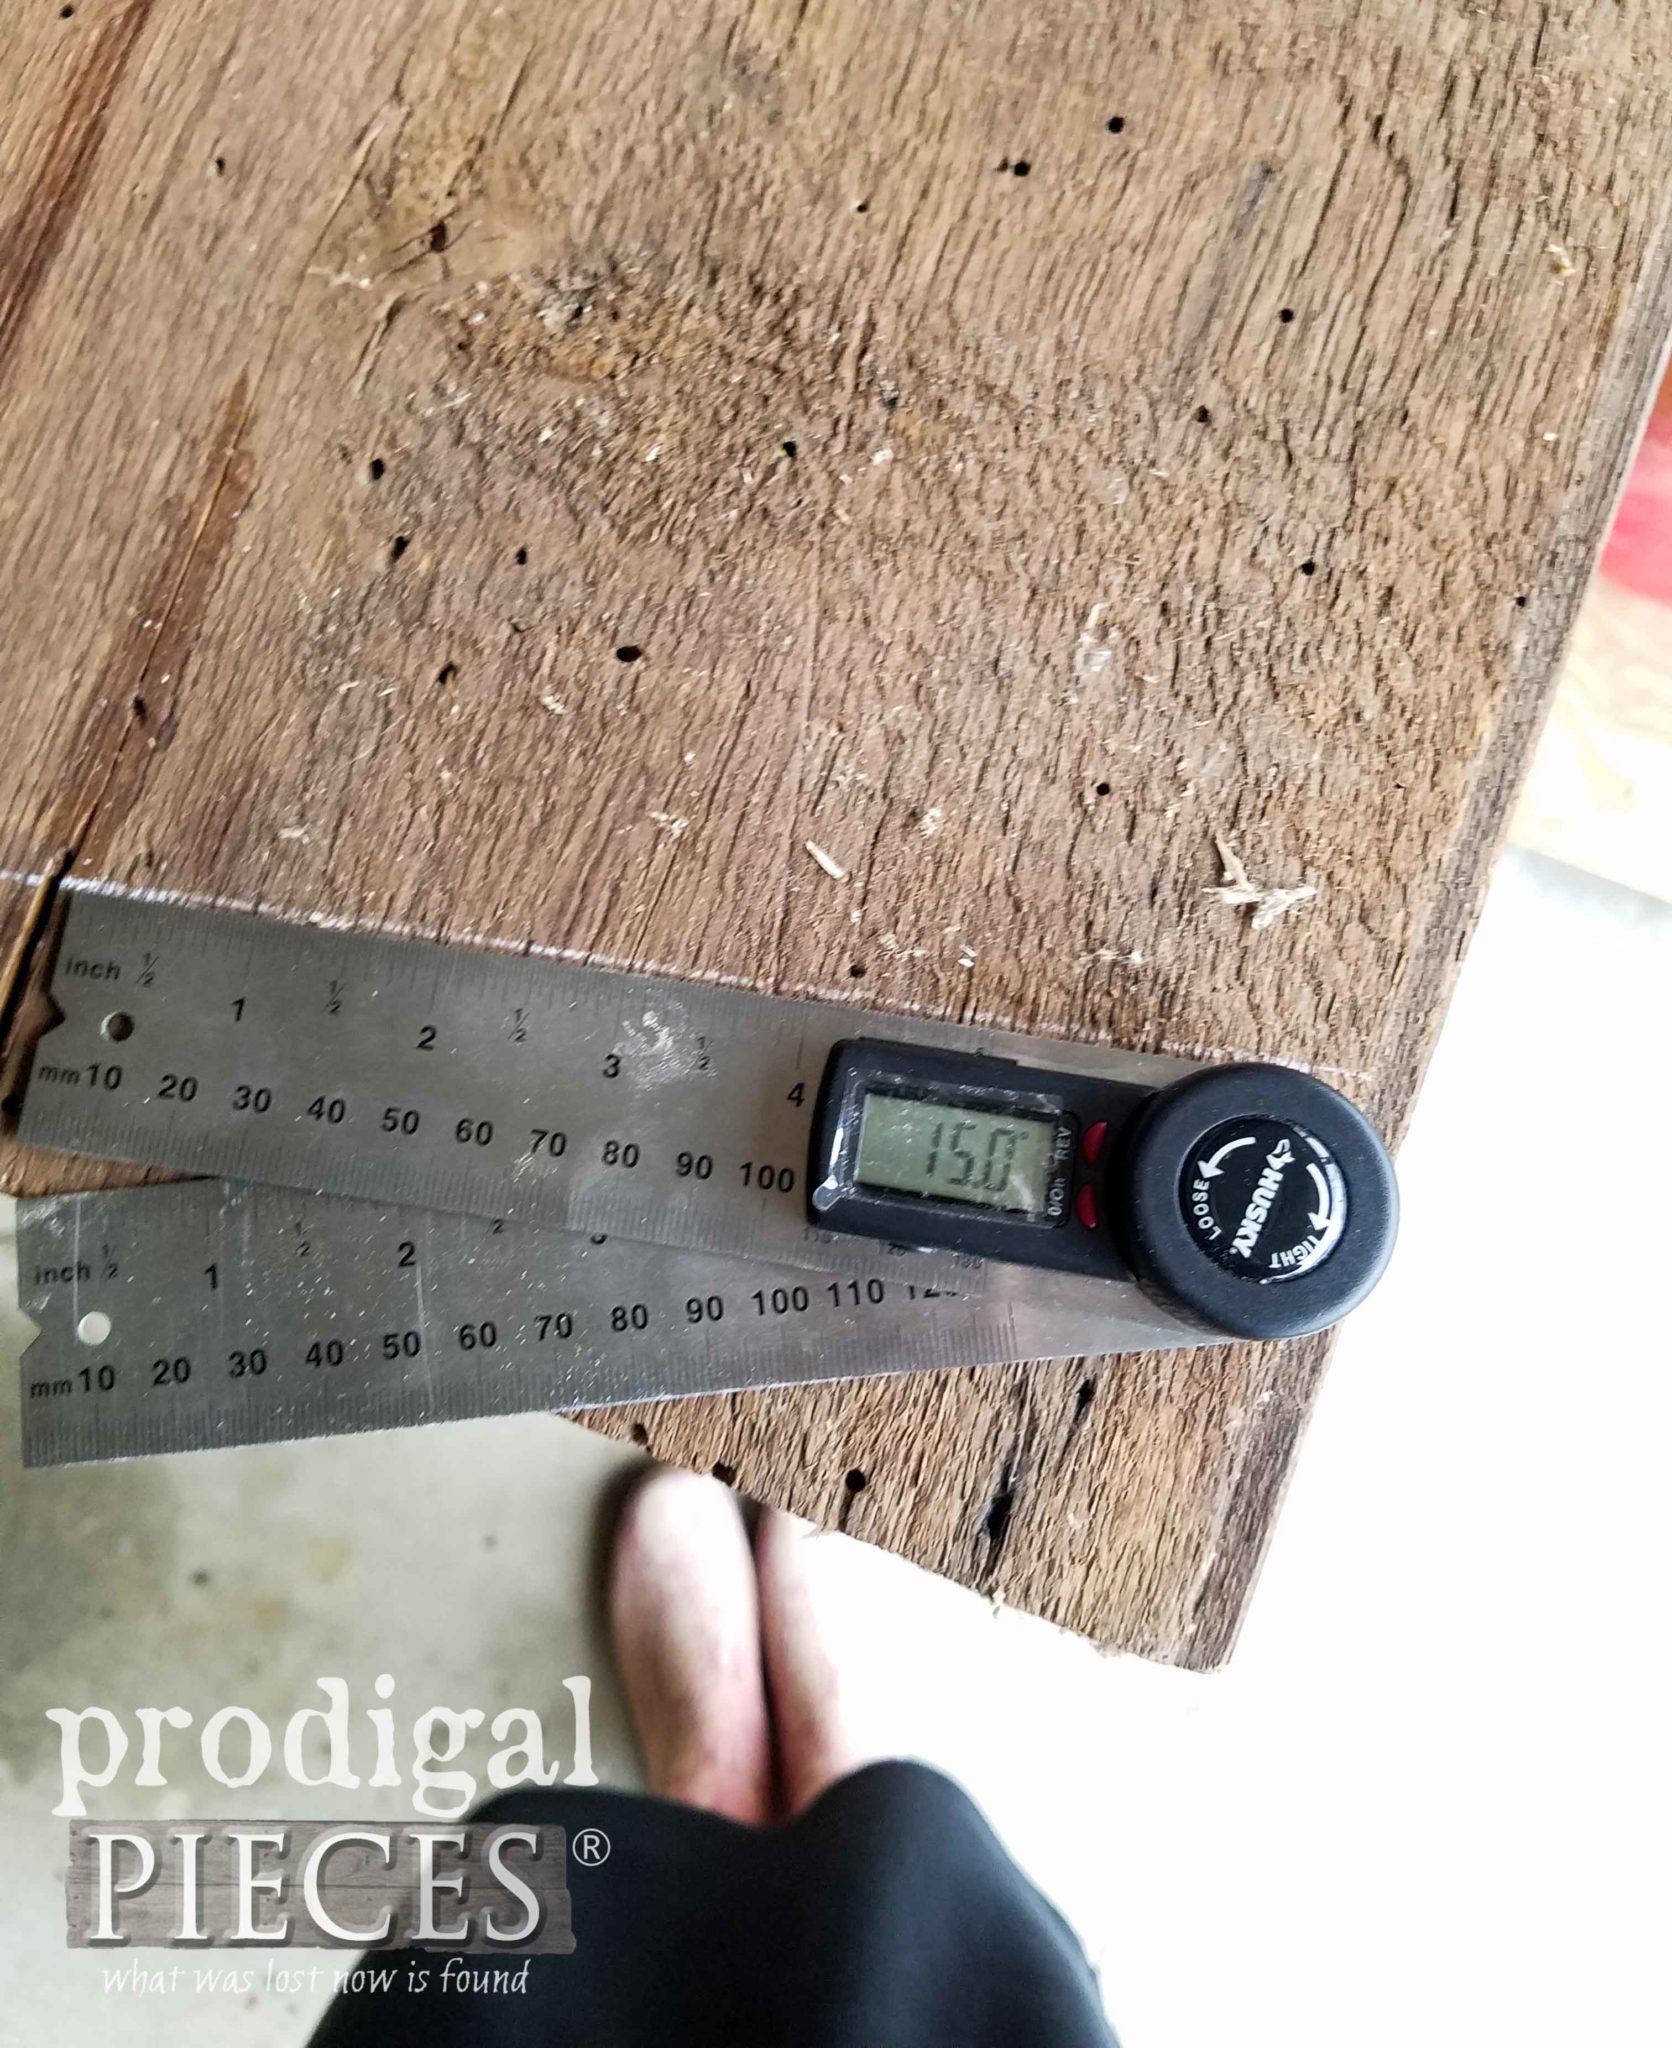 Checking angles with digital angle finder by Prodigal Pieces | prodigalpieces.com